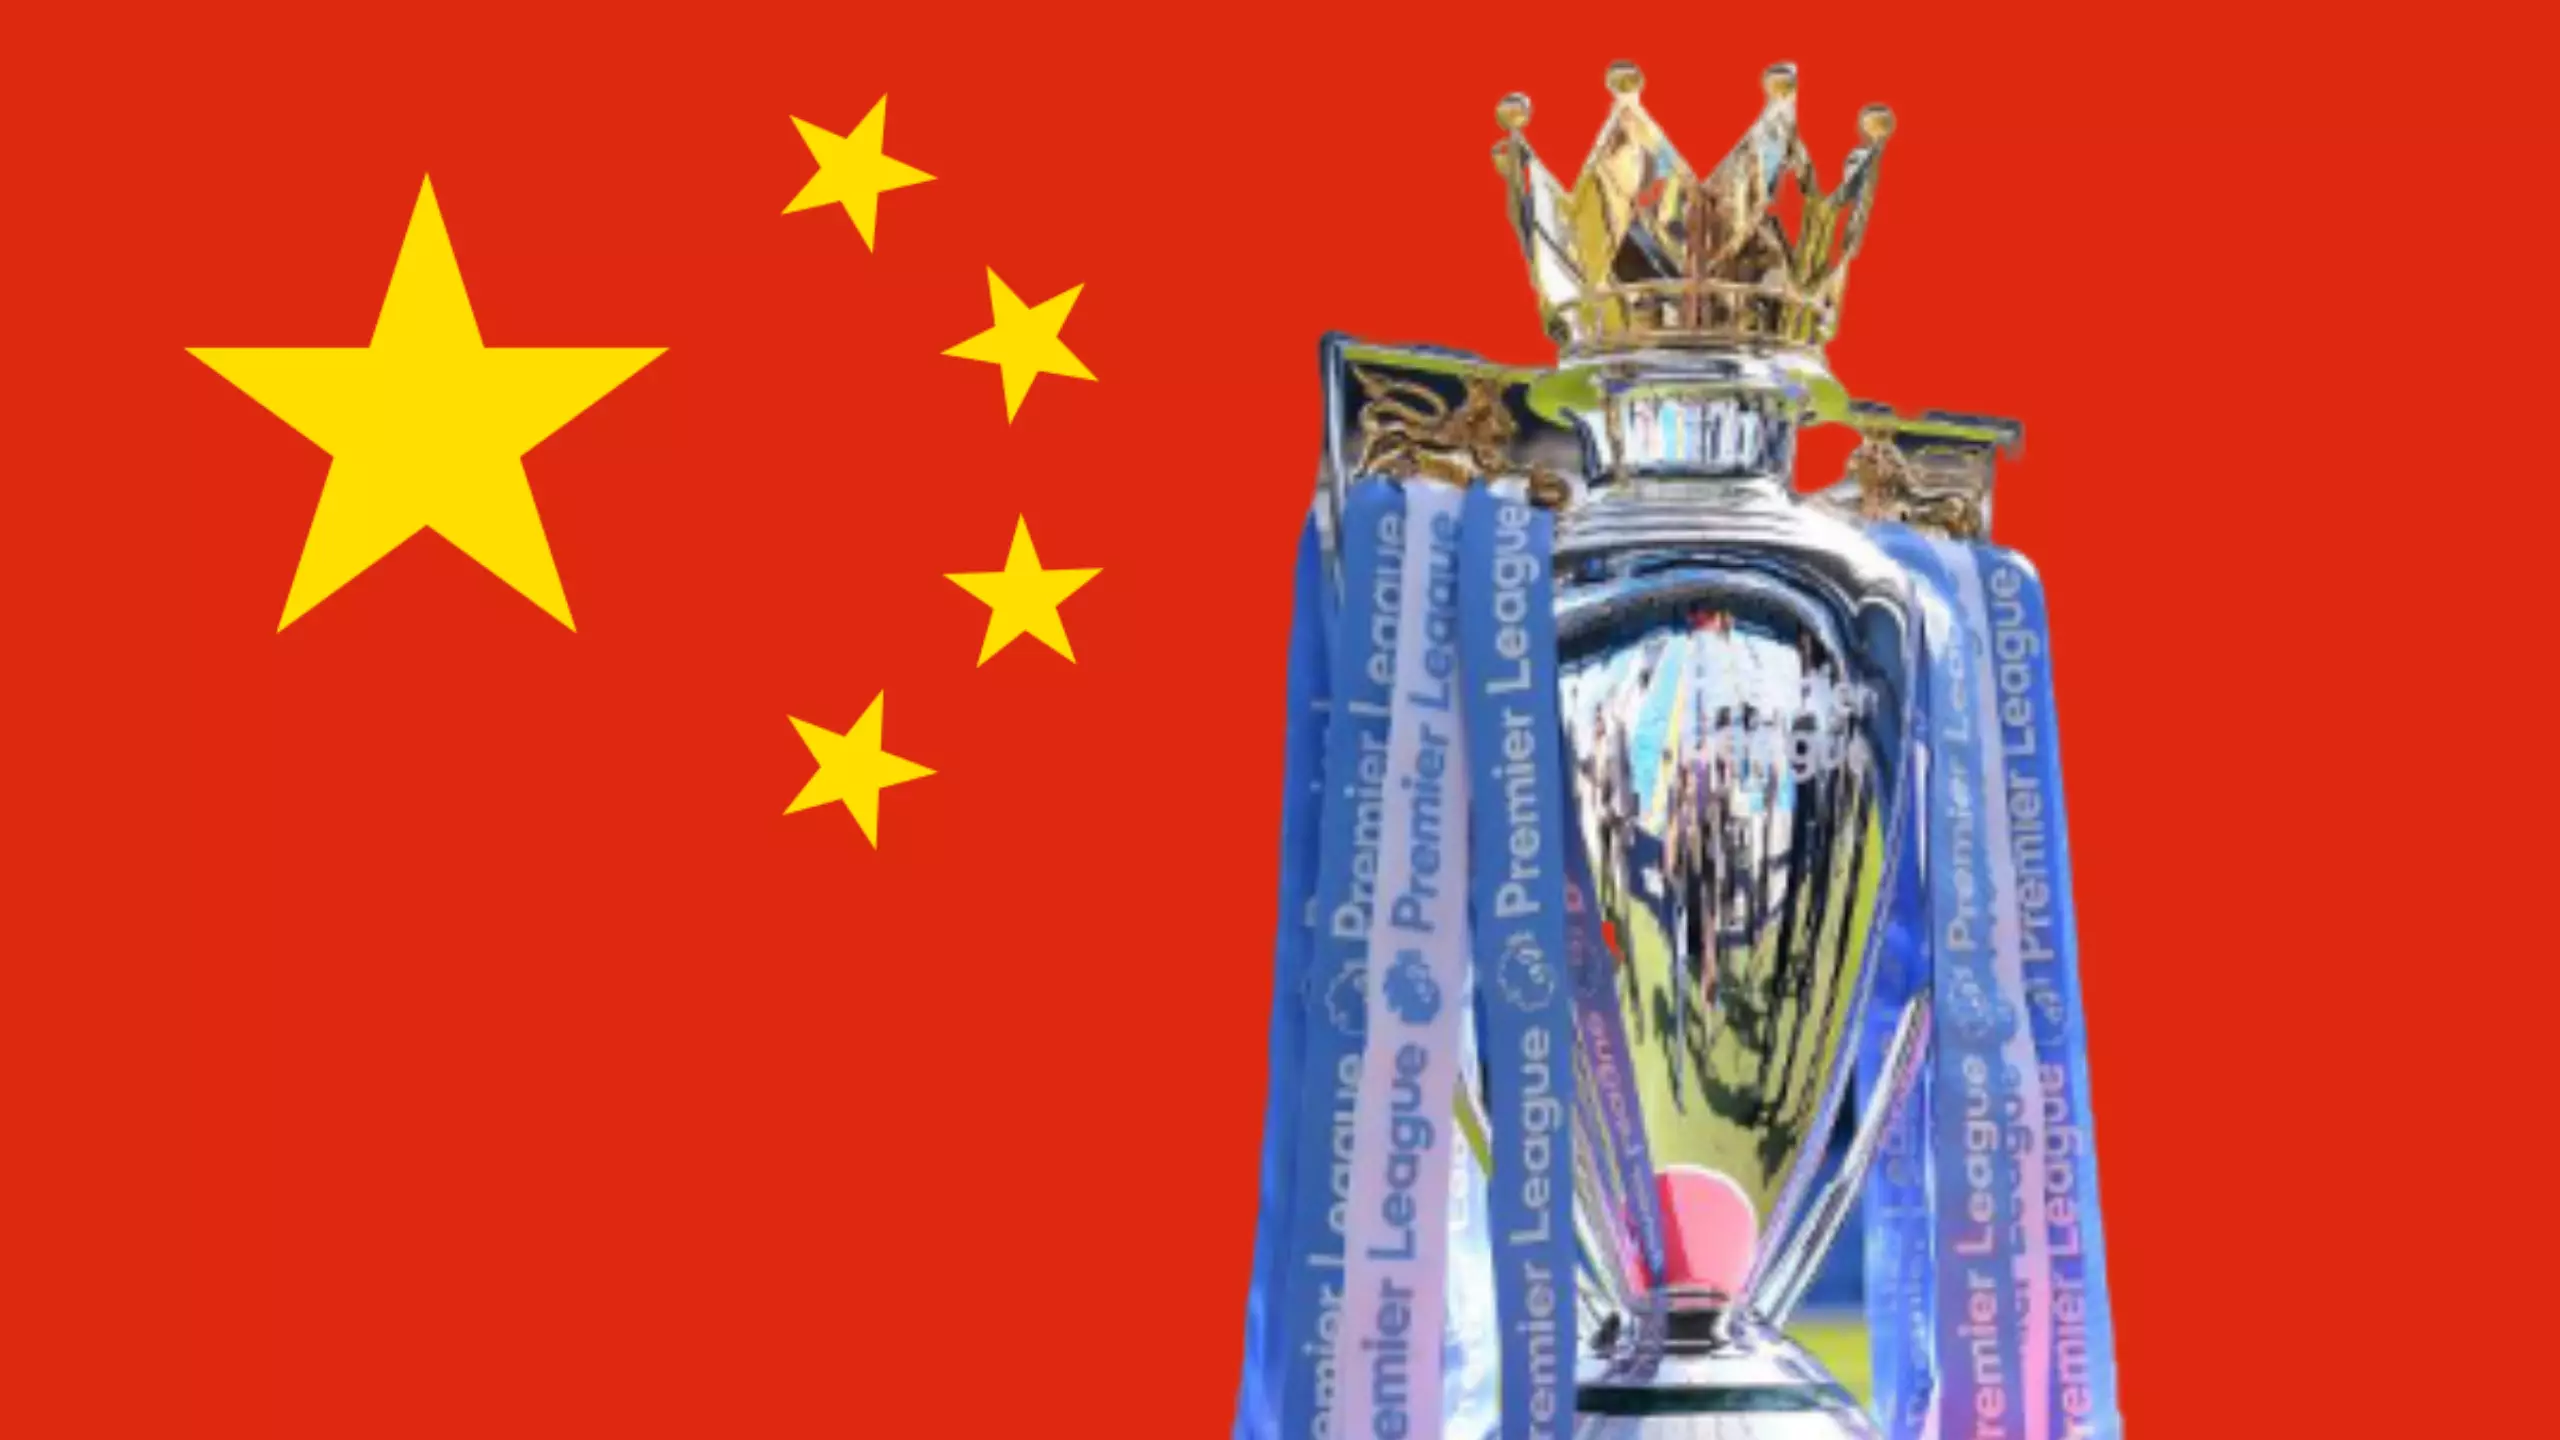 One Premier League Club Has Suggested The Current Season Be Finished In China